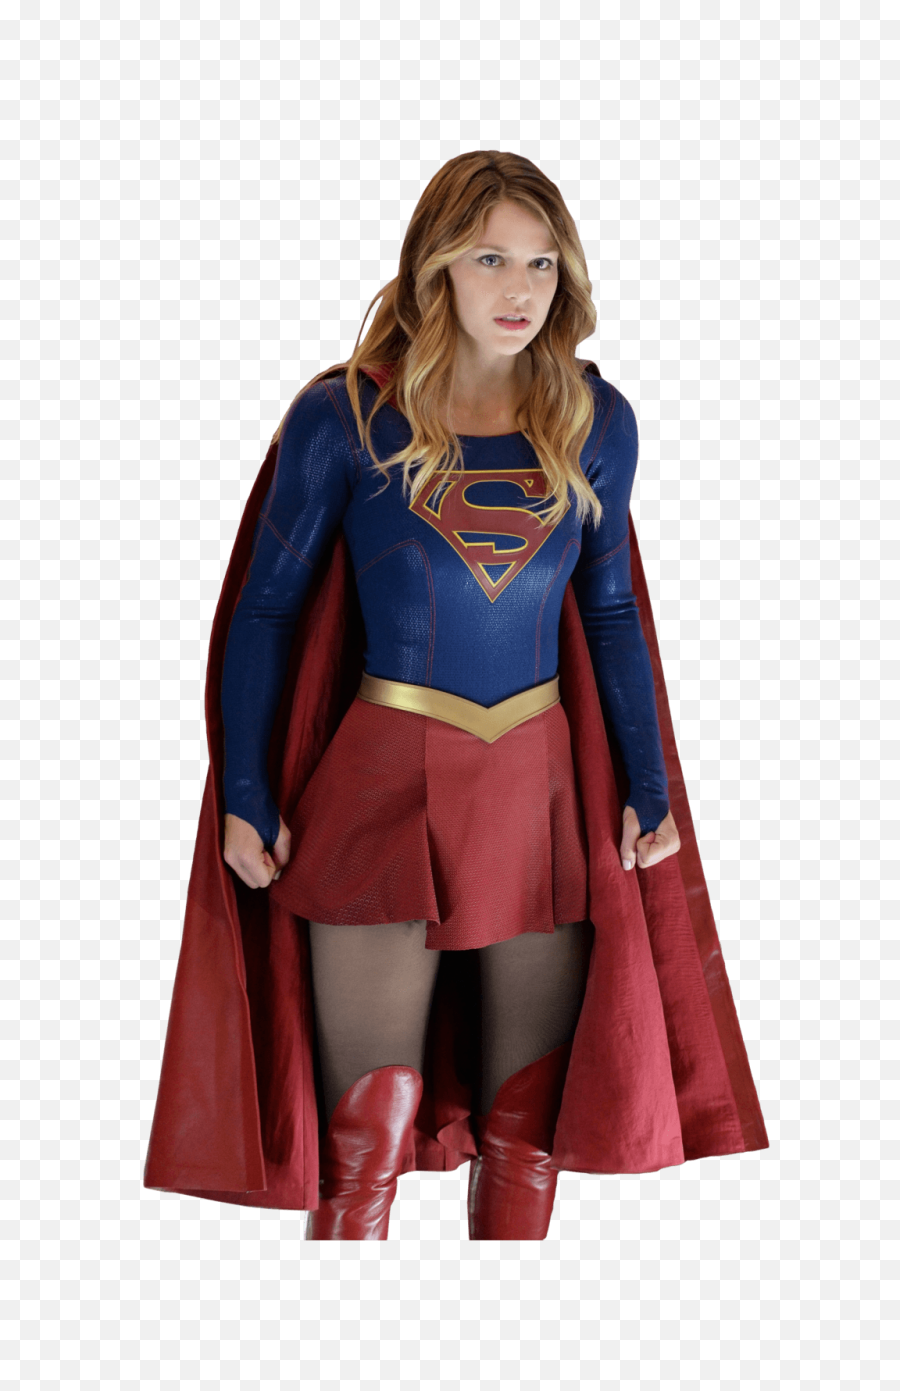 Download Free Png Supergirl - Ready Dlpngcom Melissa Benoist Png Supergirl,Supergirl Logo Png